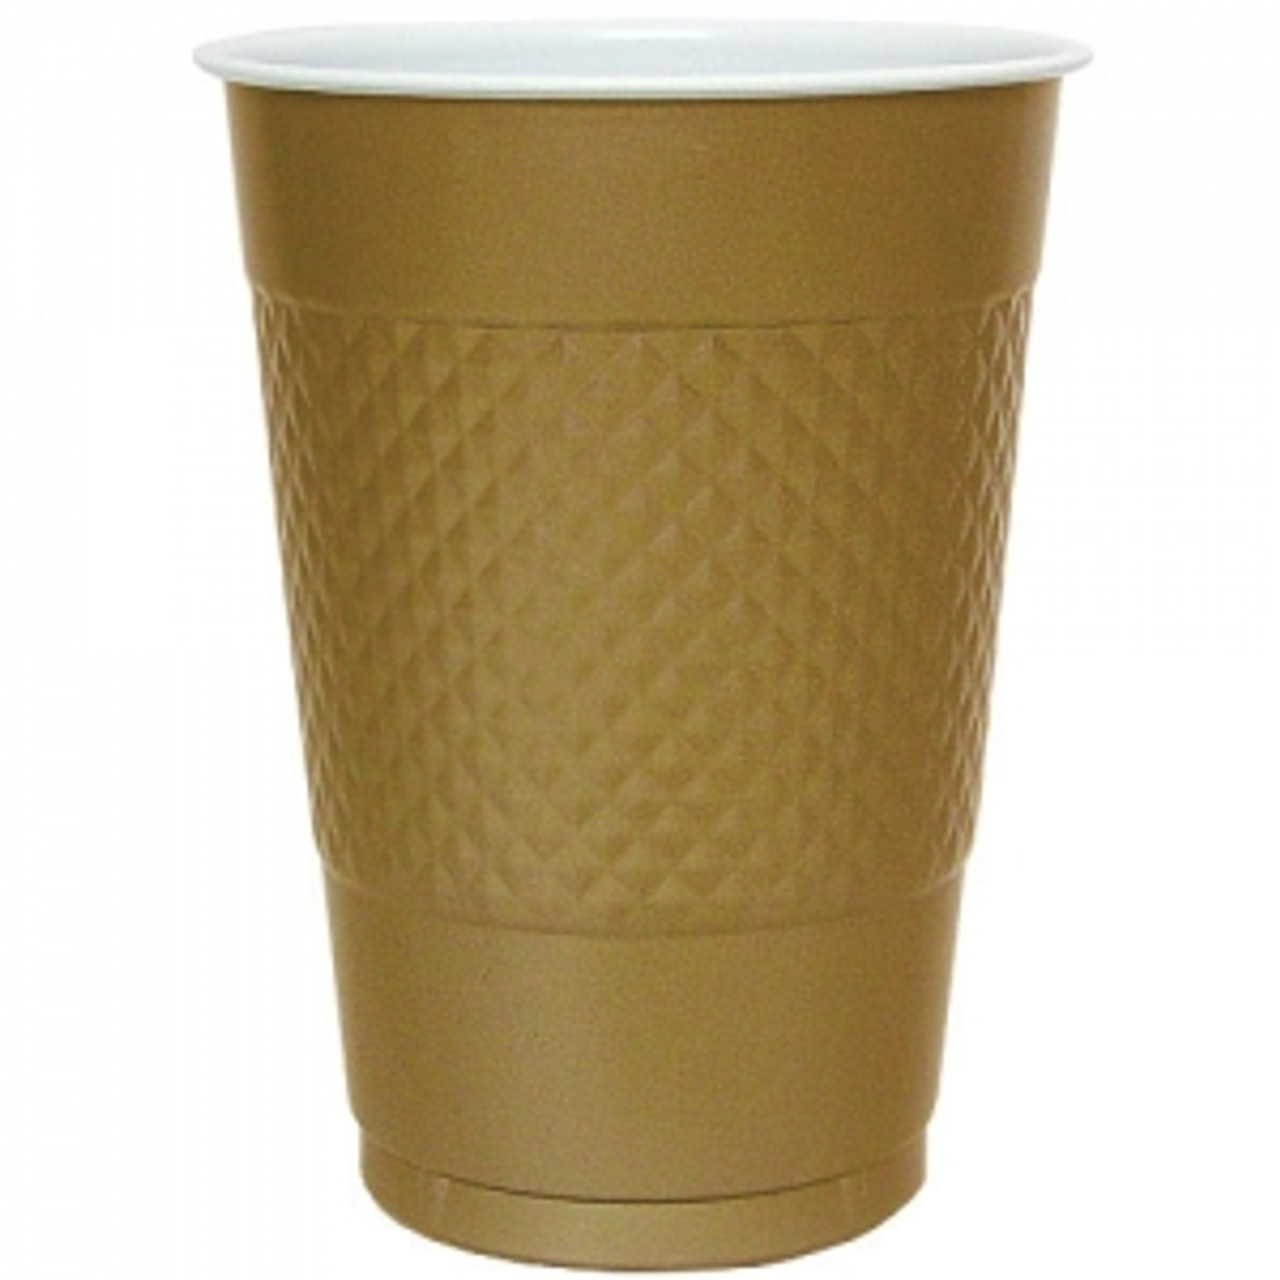 https://cdn11.bigcommerce.com/s-hgqmwywp99/images/stencil/1280x1280/products/49011/43802/16oz-gold-plastic-cups-50ct-5__86371.1675880297.jpg?c=1?imbypass=on